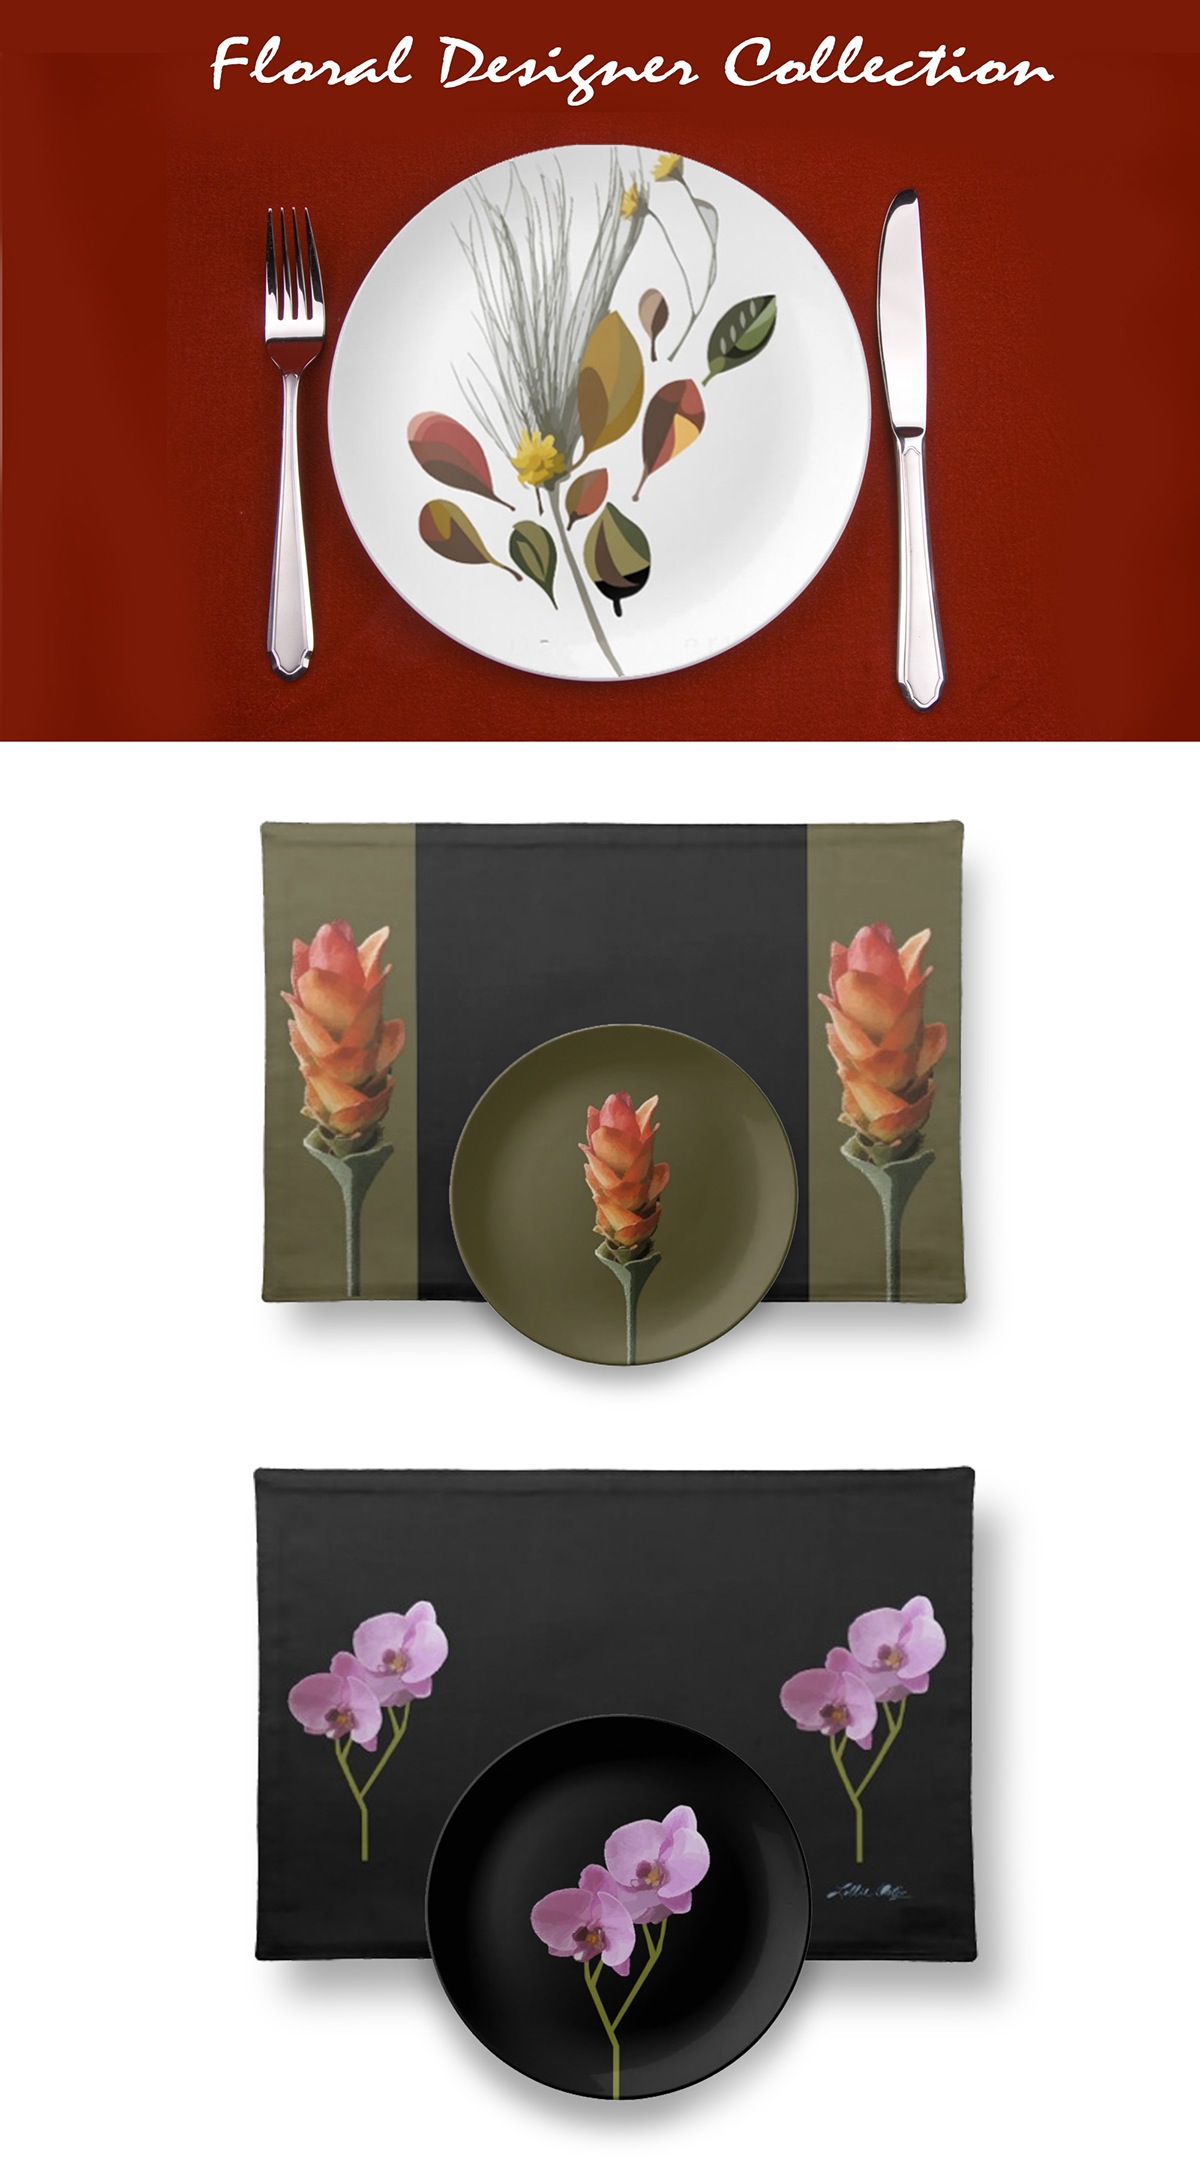 dinnerware collections interiors decorative home table settngs. colors design Patterns floral